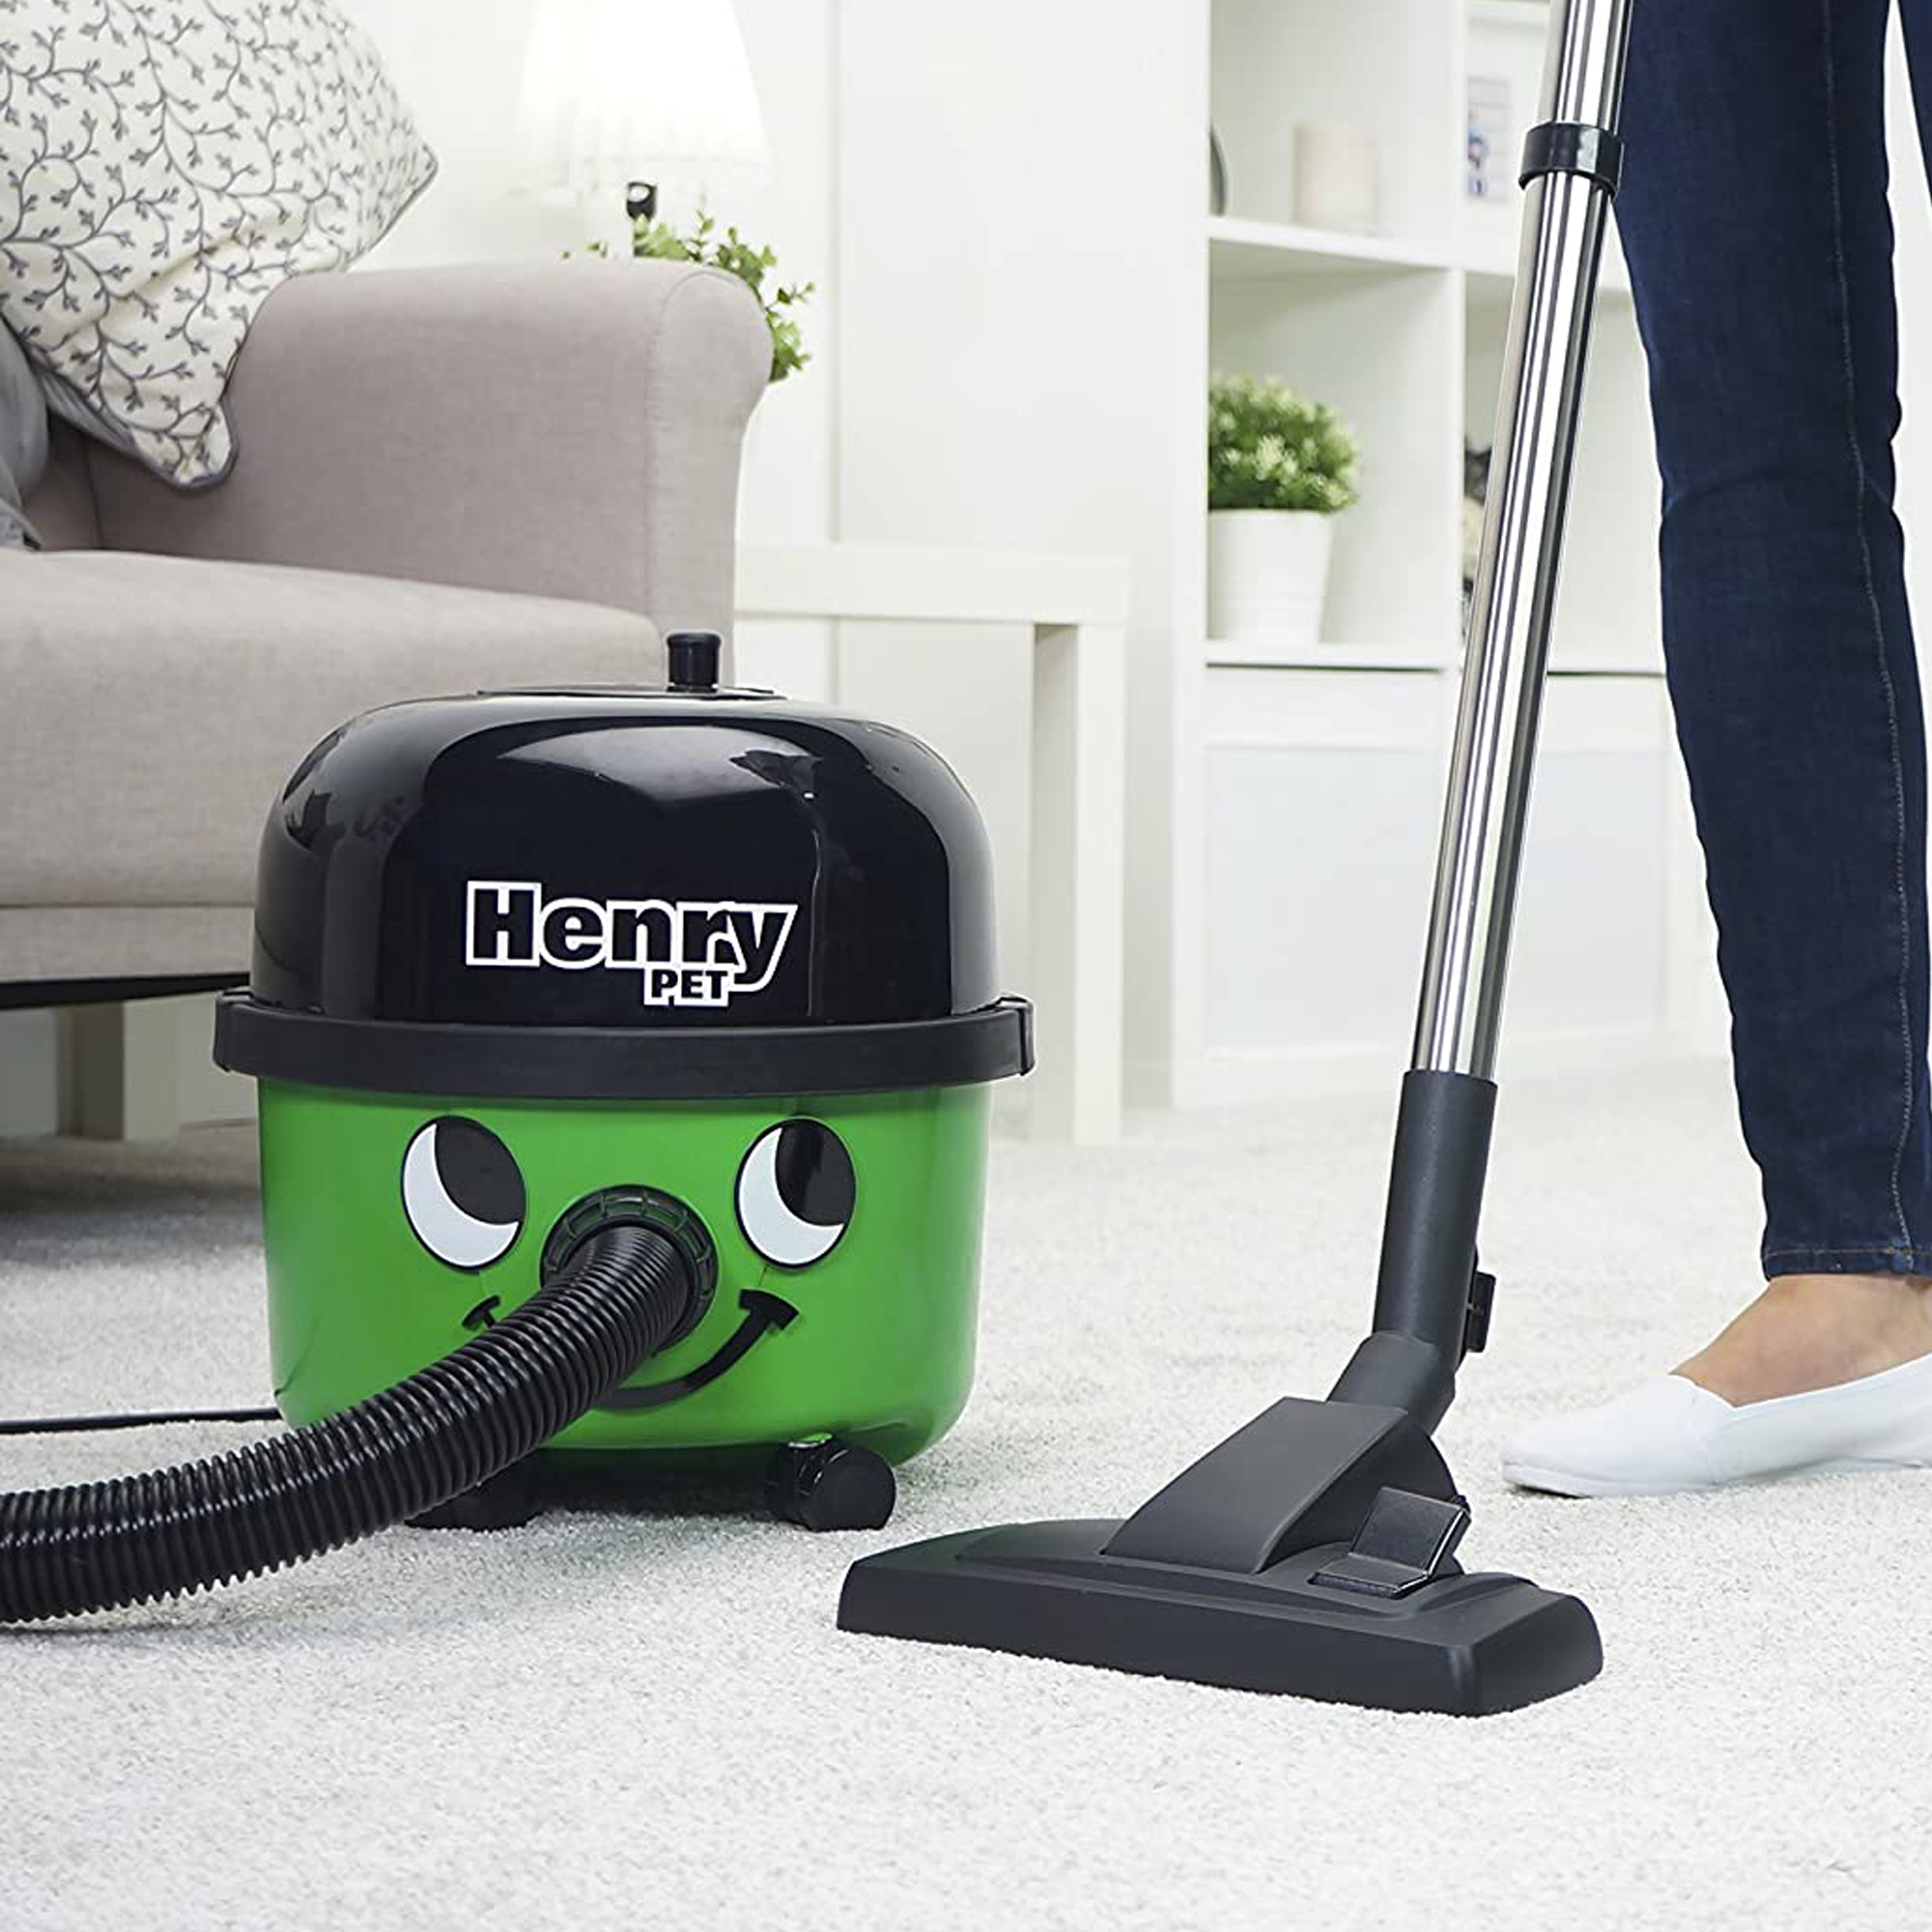 Numatic Henry HVR160 Compact Cylinder Vacuum Cleaner - Green